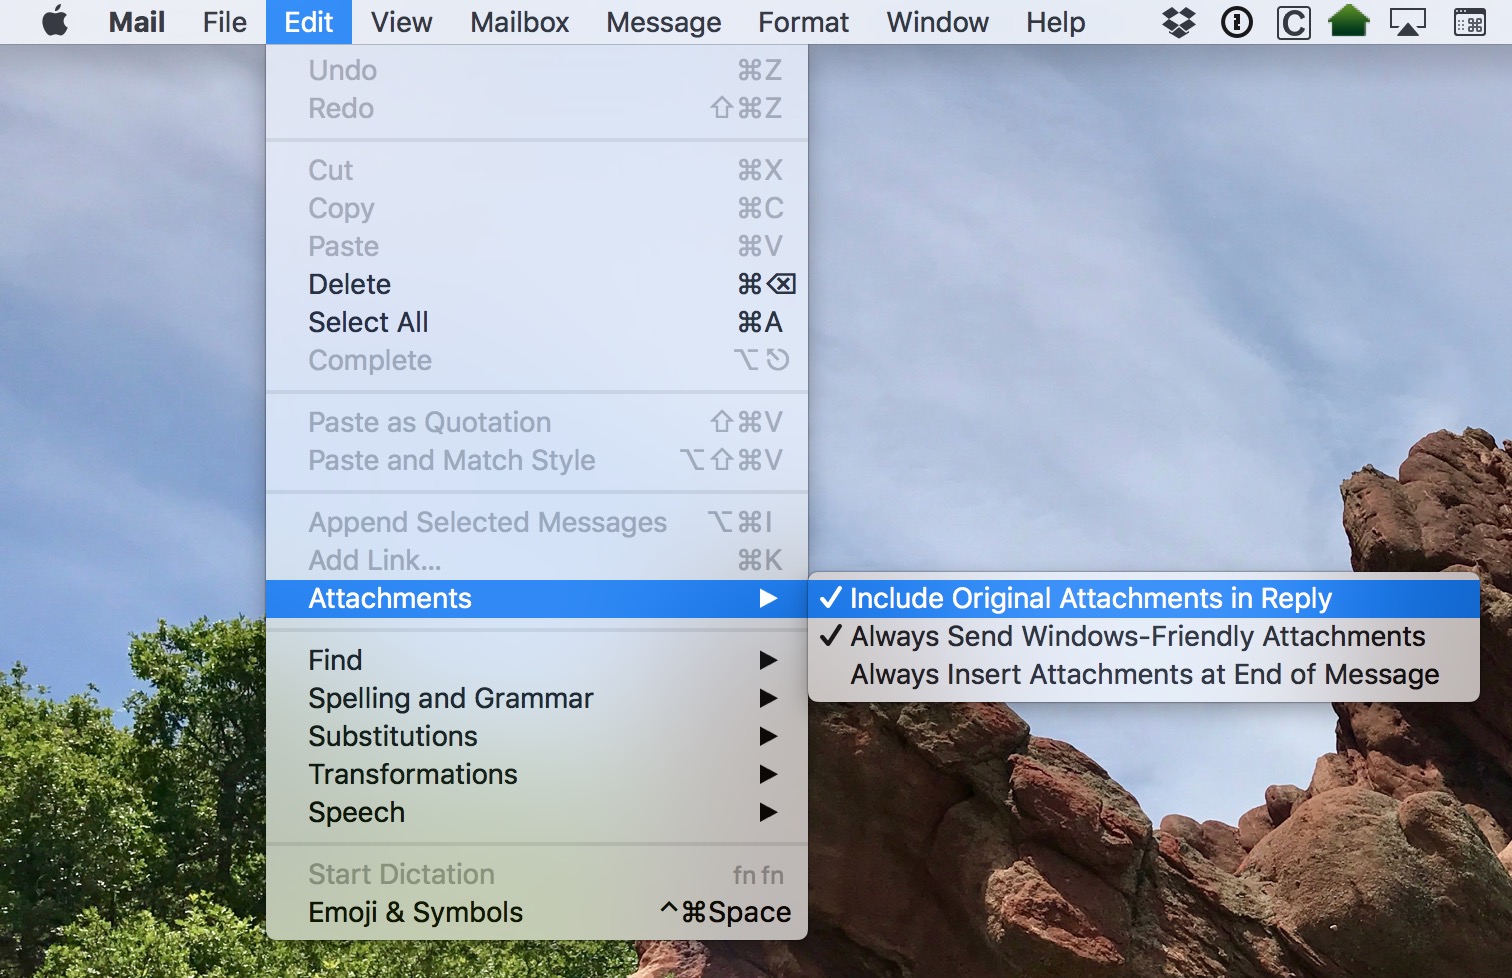 reply-to-emails-with-original-attachments-in-mac-os-x-mail